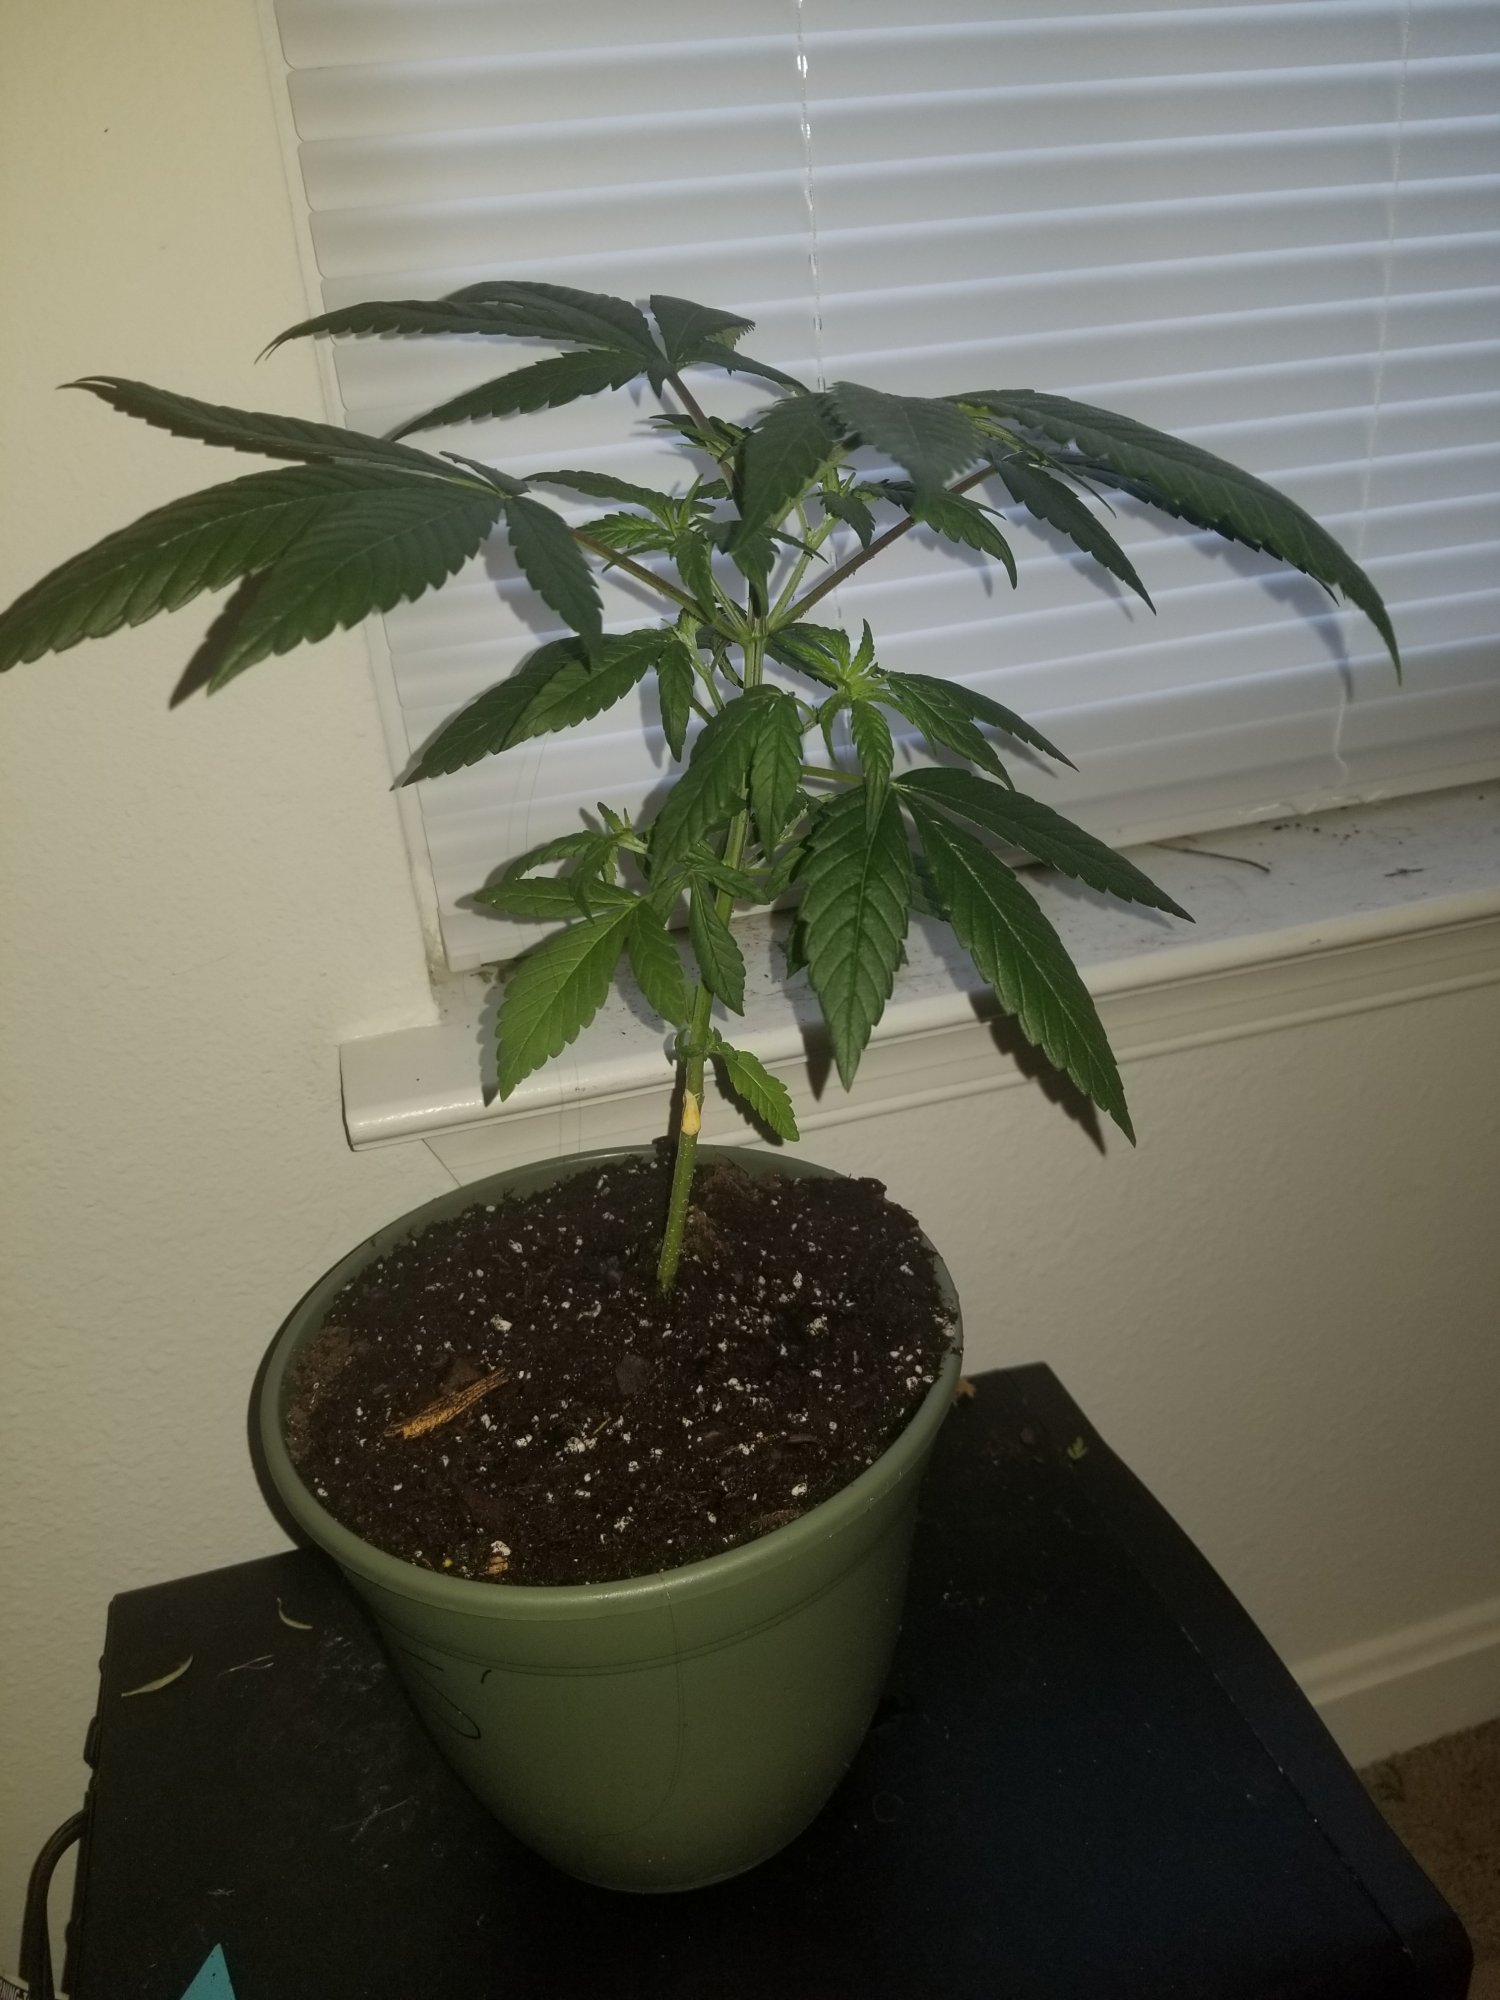 Having trouble transplanting from pot